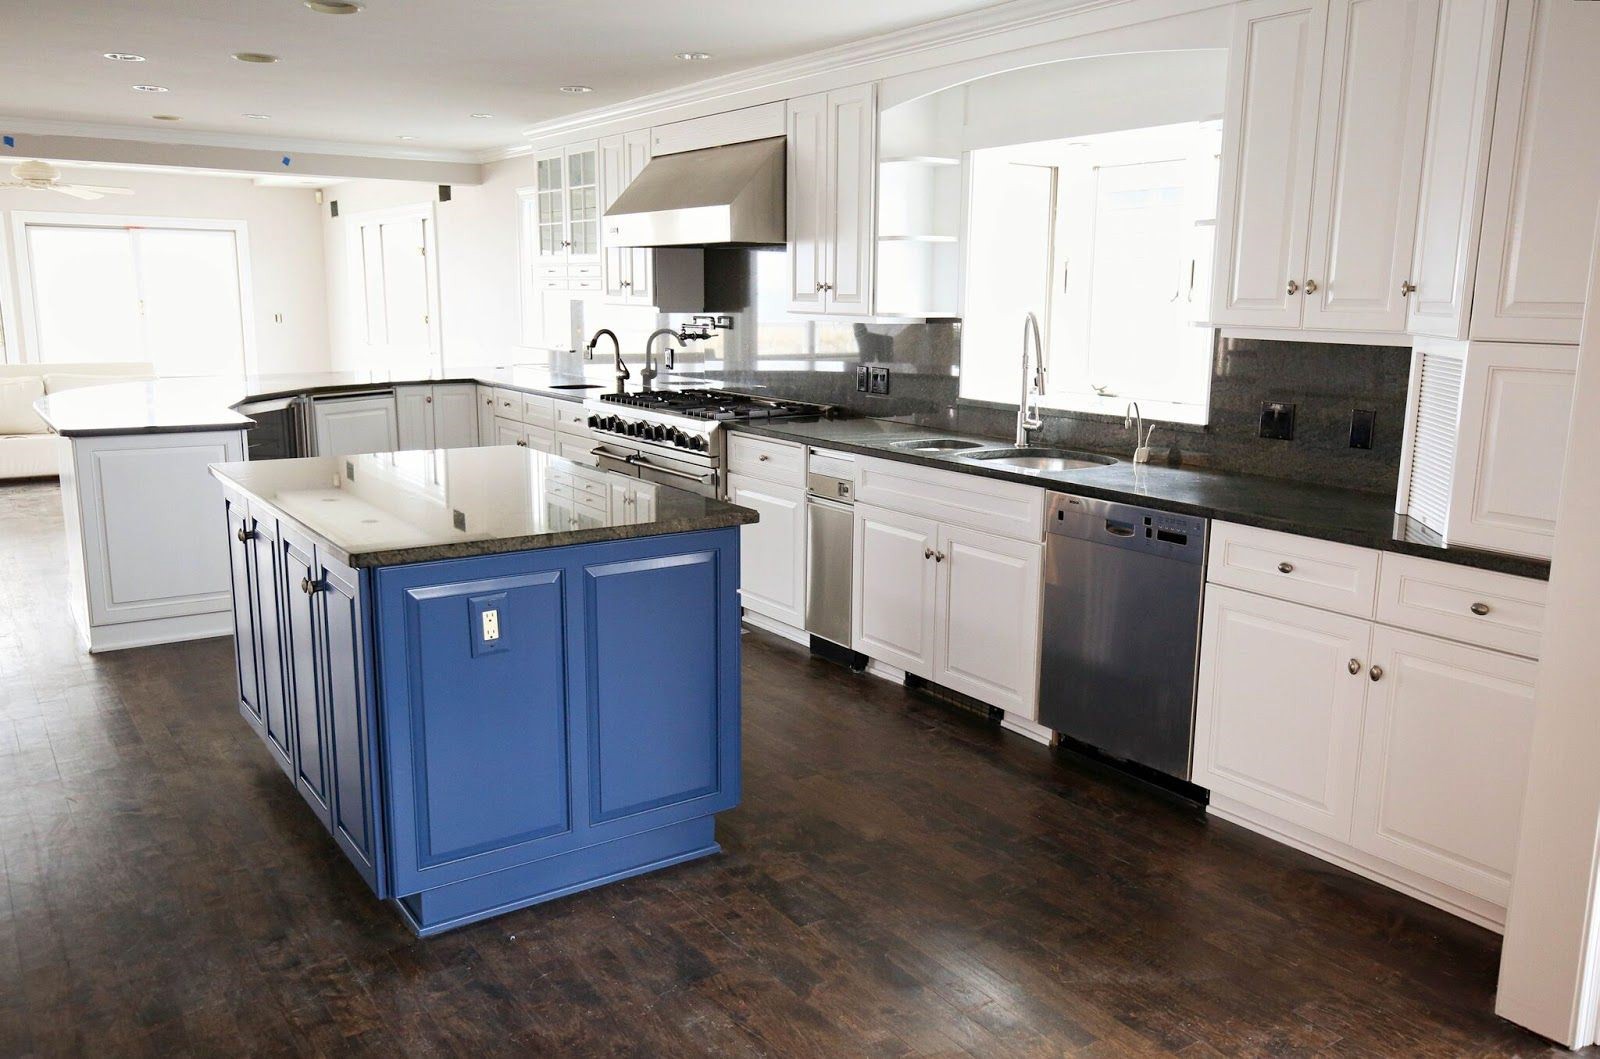 Don't want to refinish your entire kitchen? What about just your kitchen island? N-Hance Three Rivers Pittsburgh (412)407-9095